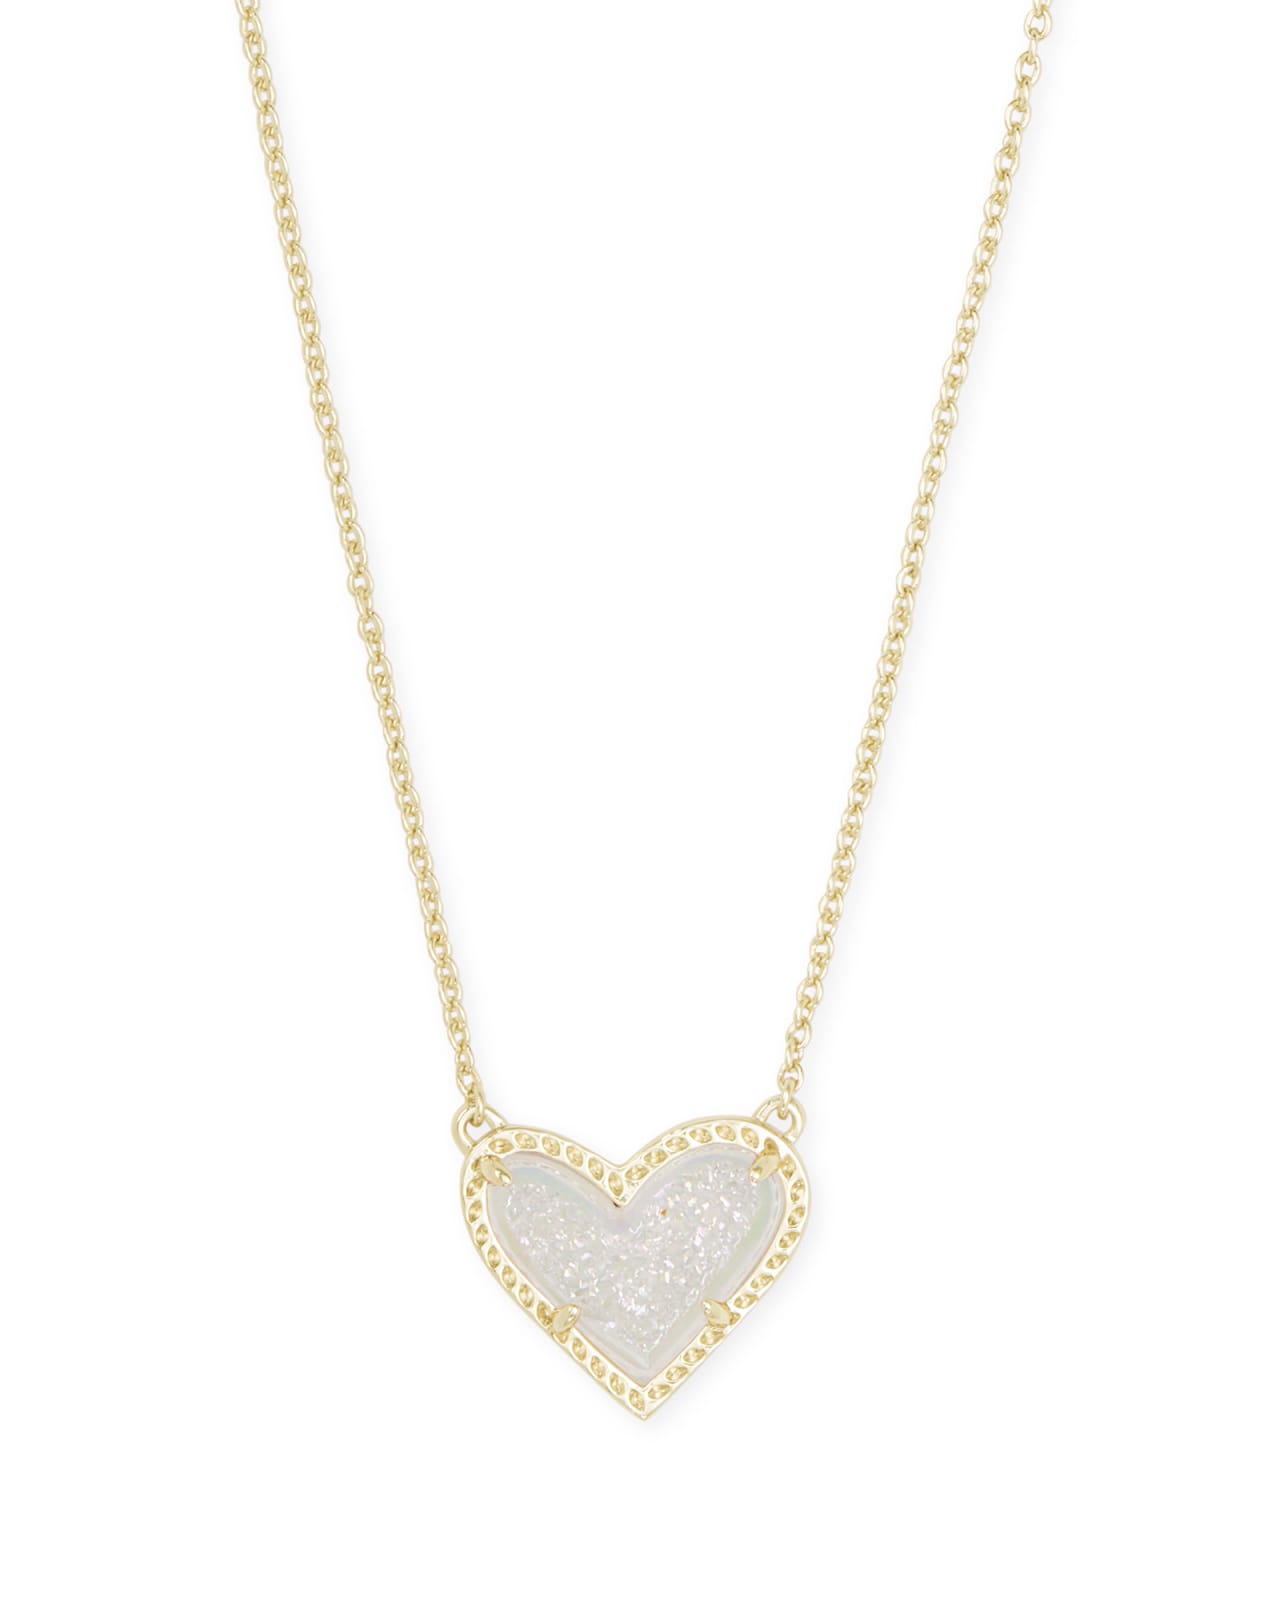 Ari Heart Gold Extended Length Pendant Necklace in Iridescent Drusy | Kendra Scott